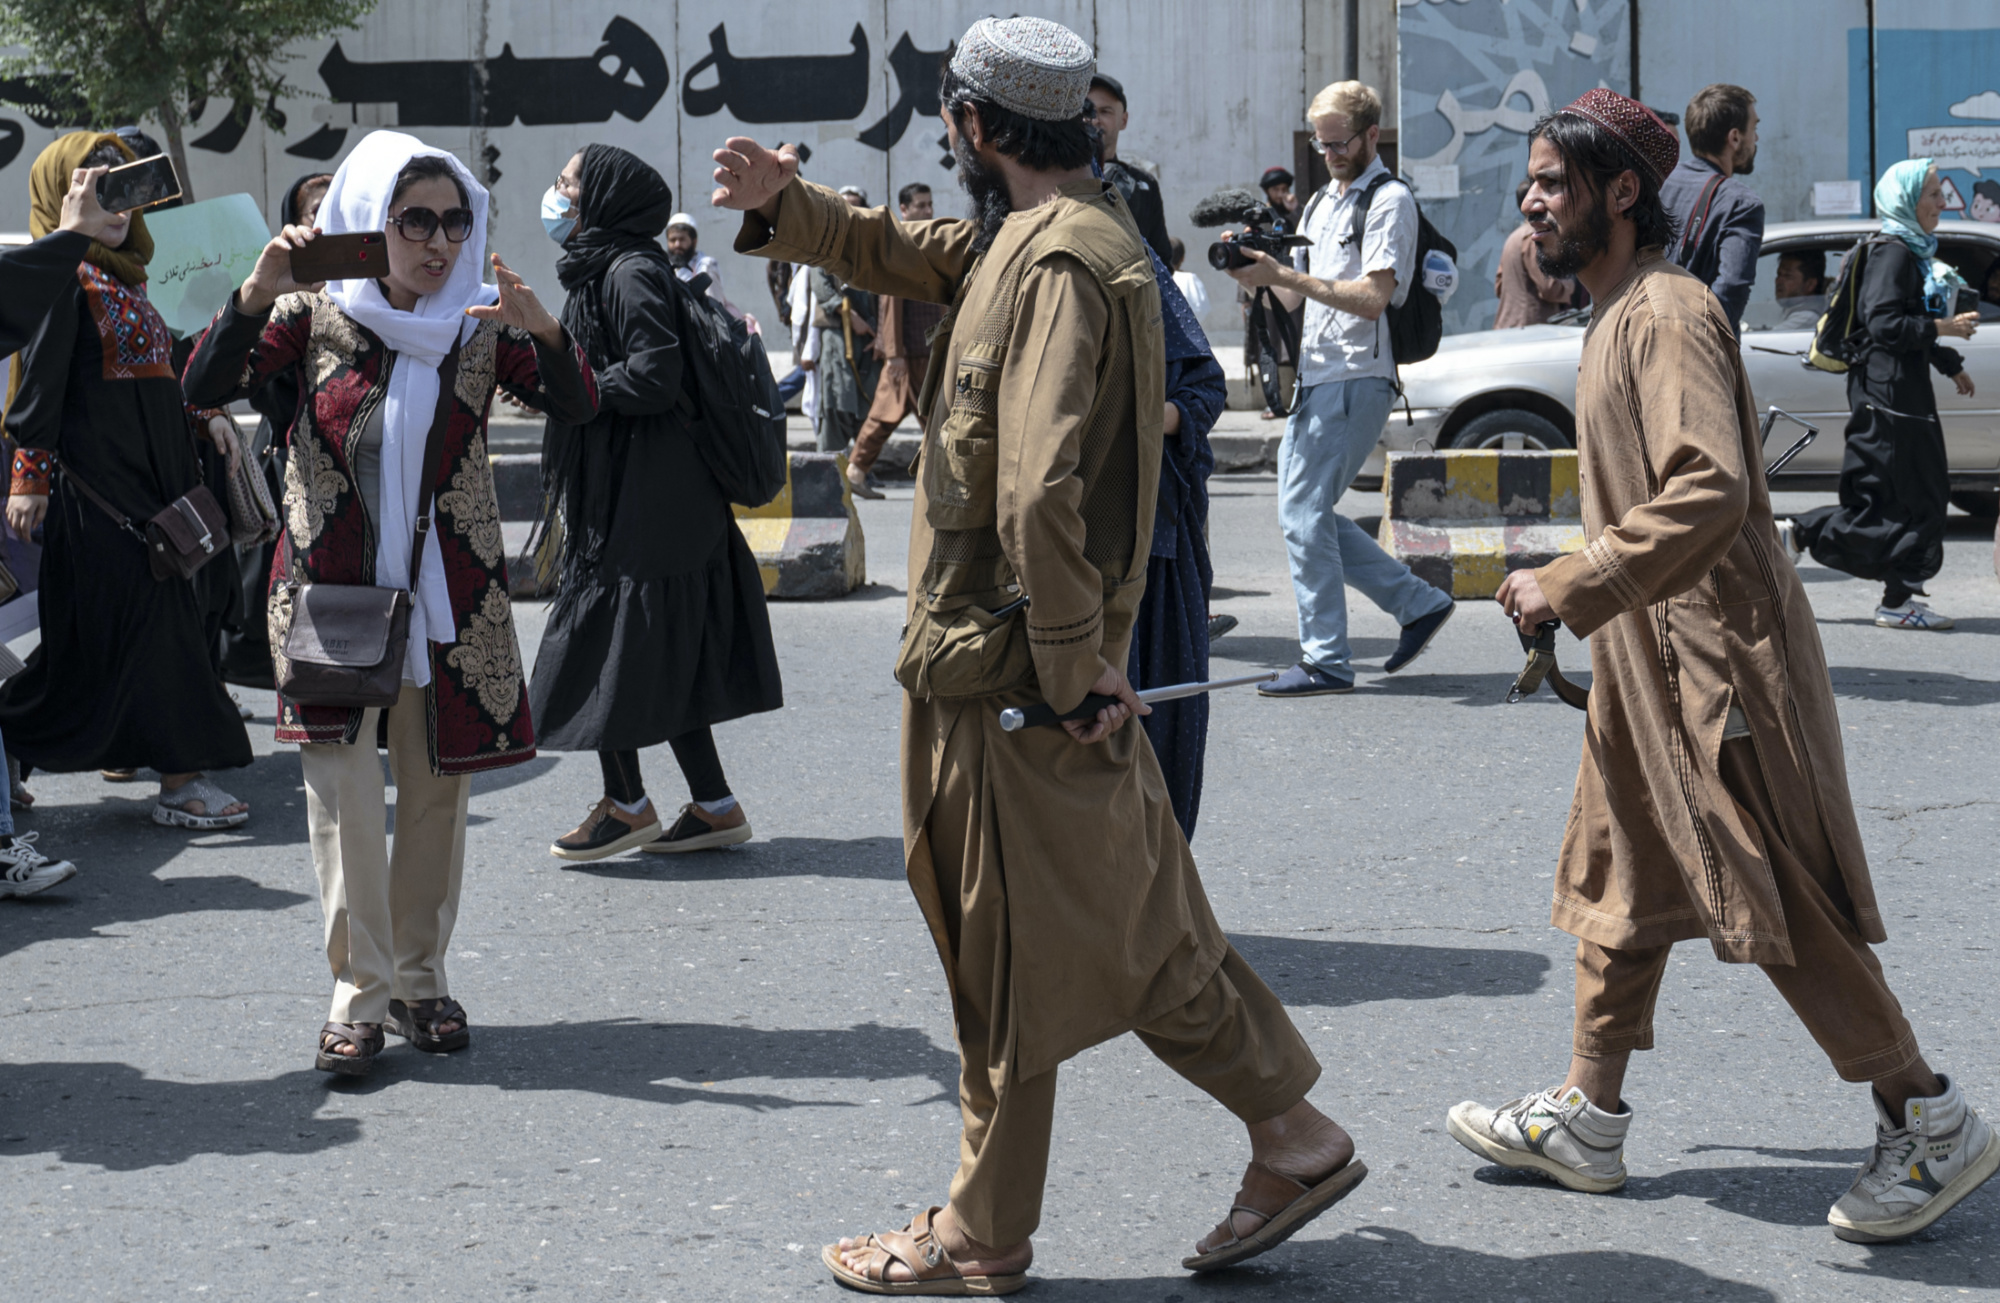 Taliban fighters walk as they fire into the air to disperse Afghan women protesters in Kabul on 13 August 2022 (AFP)